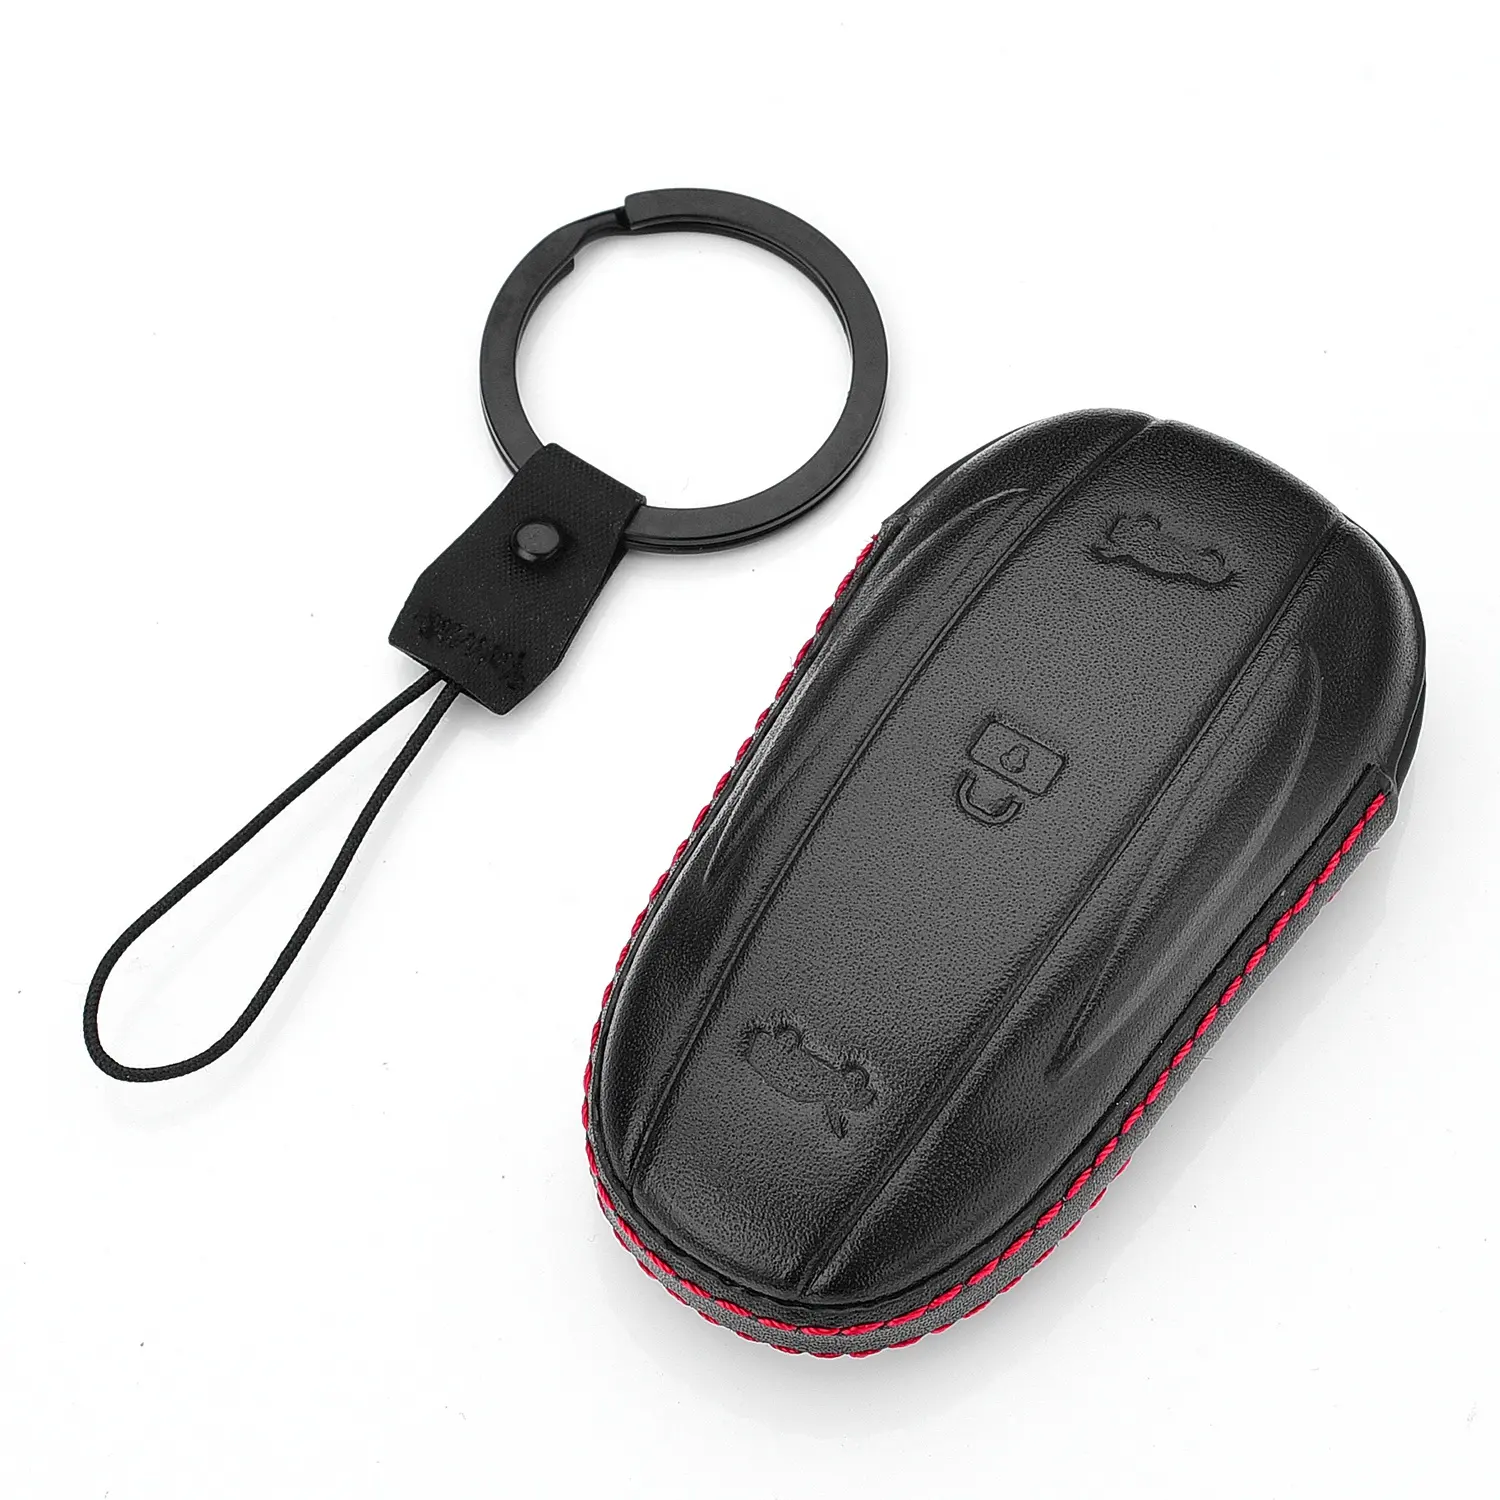 Classy Anti Dust Full Protect Top Leather Key Cover for model X SUV Black Red White Color Option